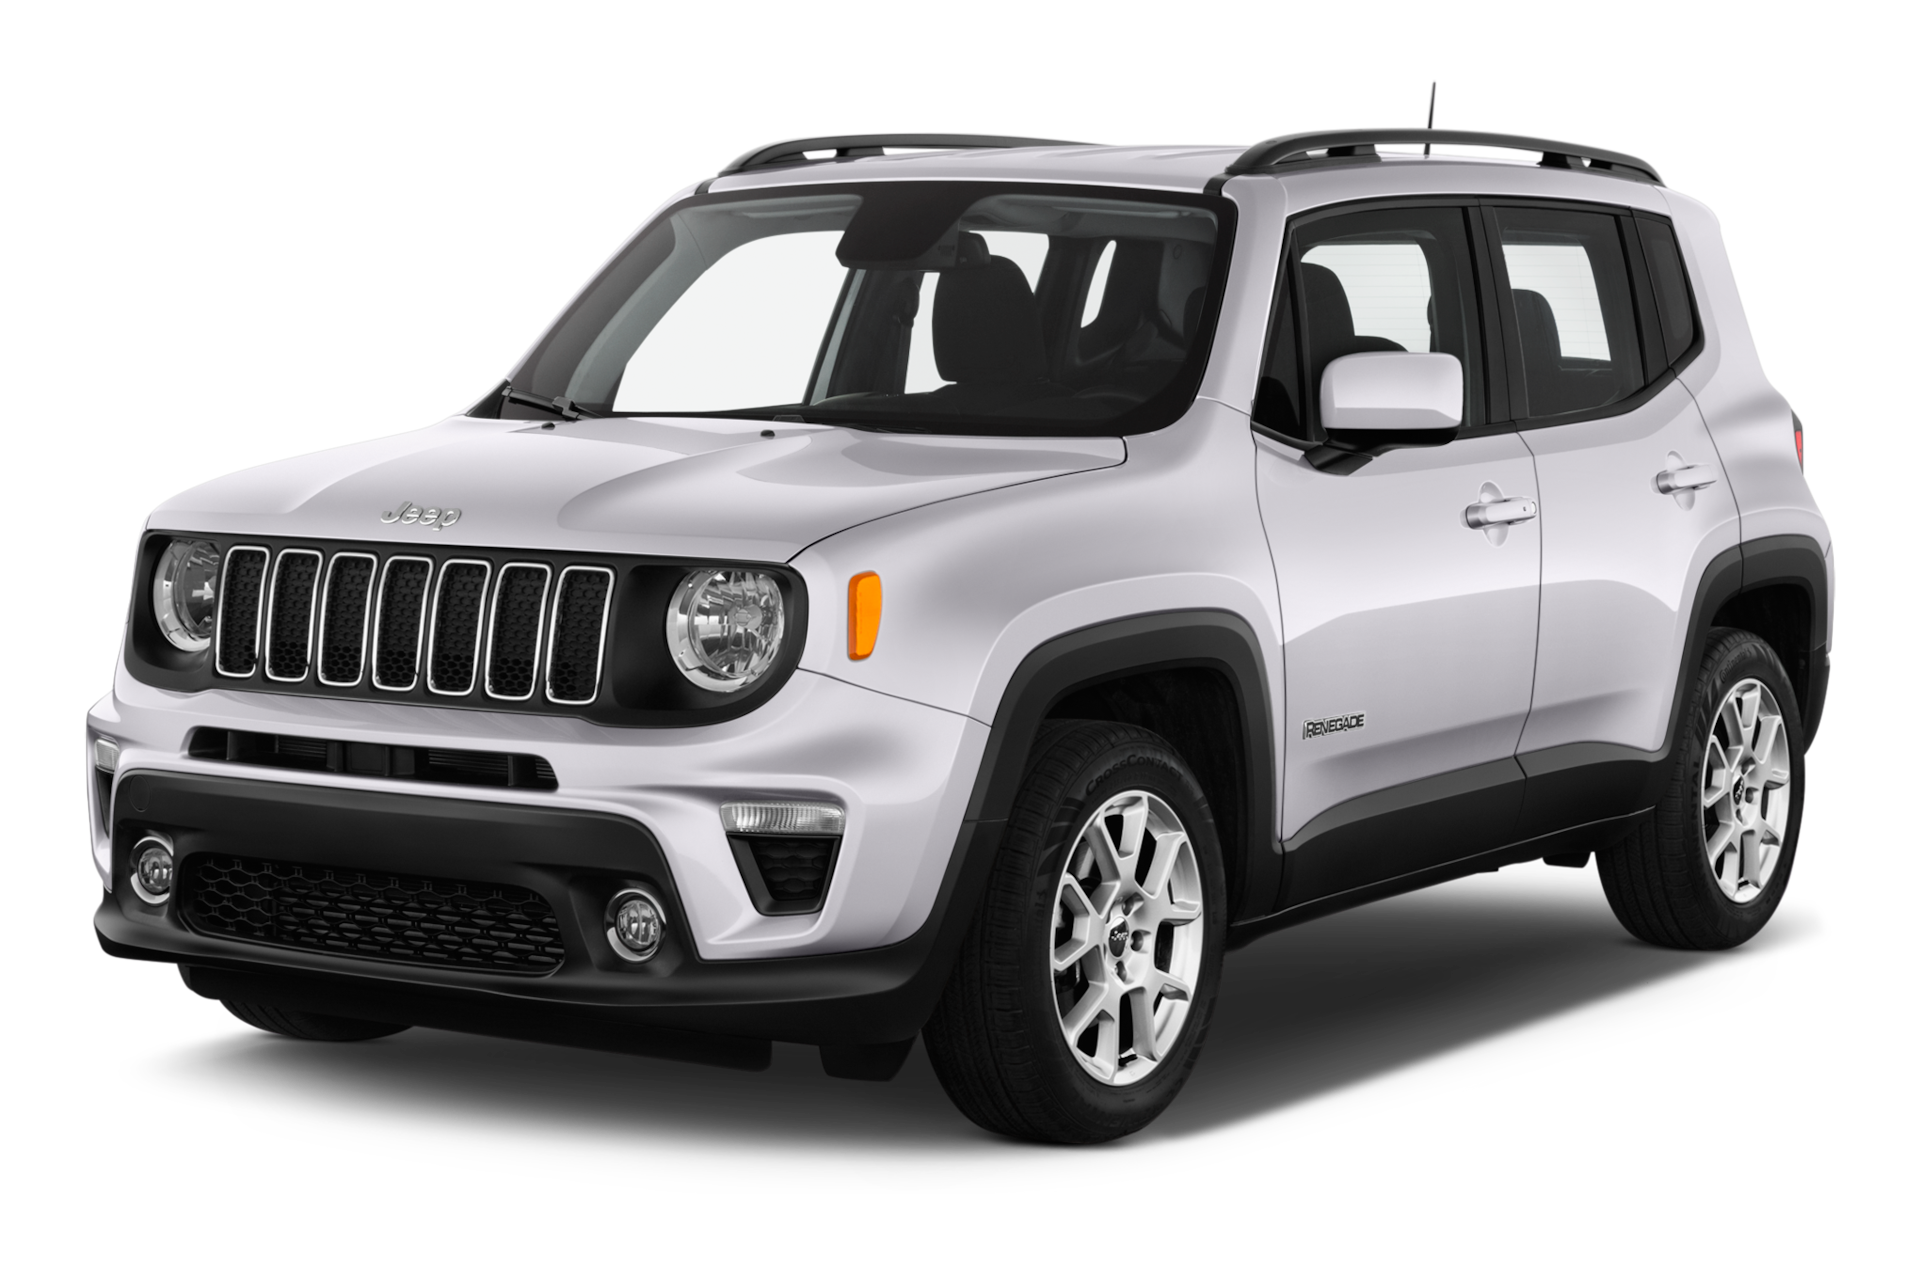 2020 Jeep Renegade Prices, Reviews, and Photos - MotorTrend